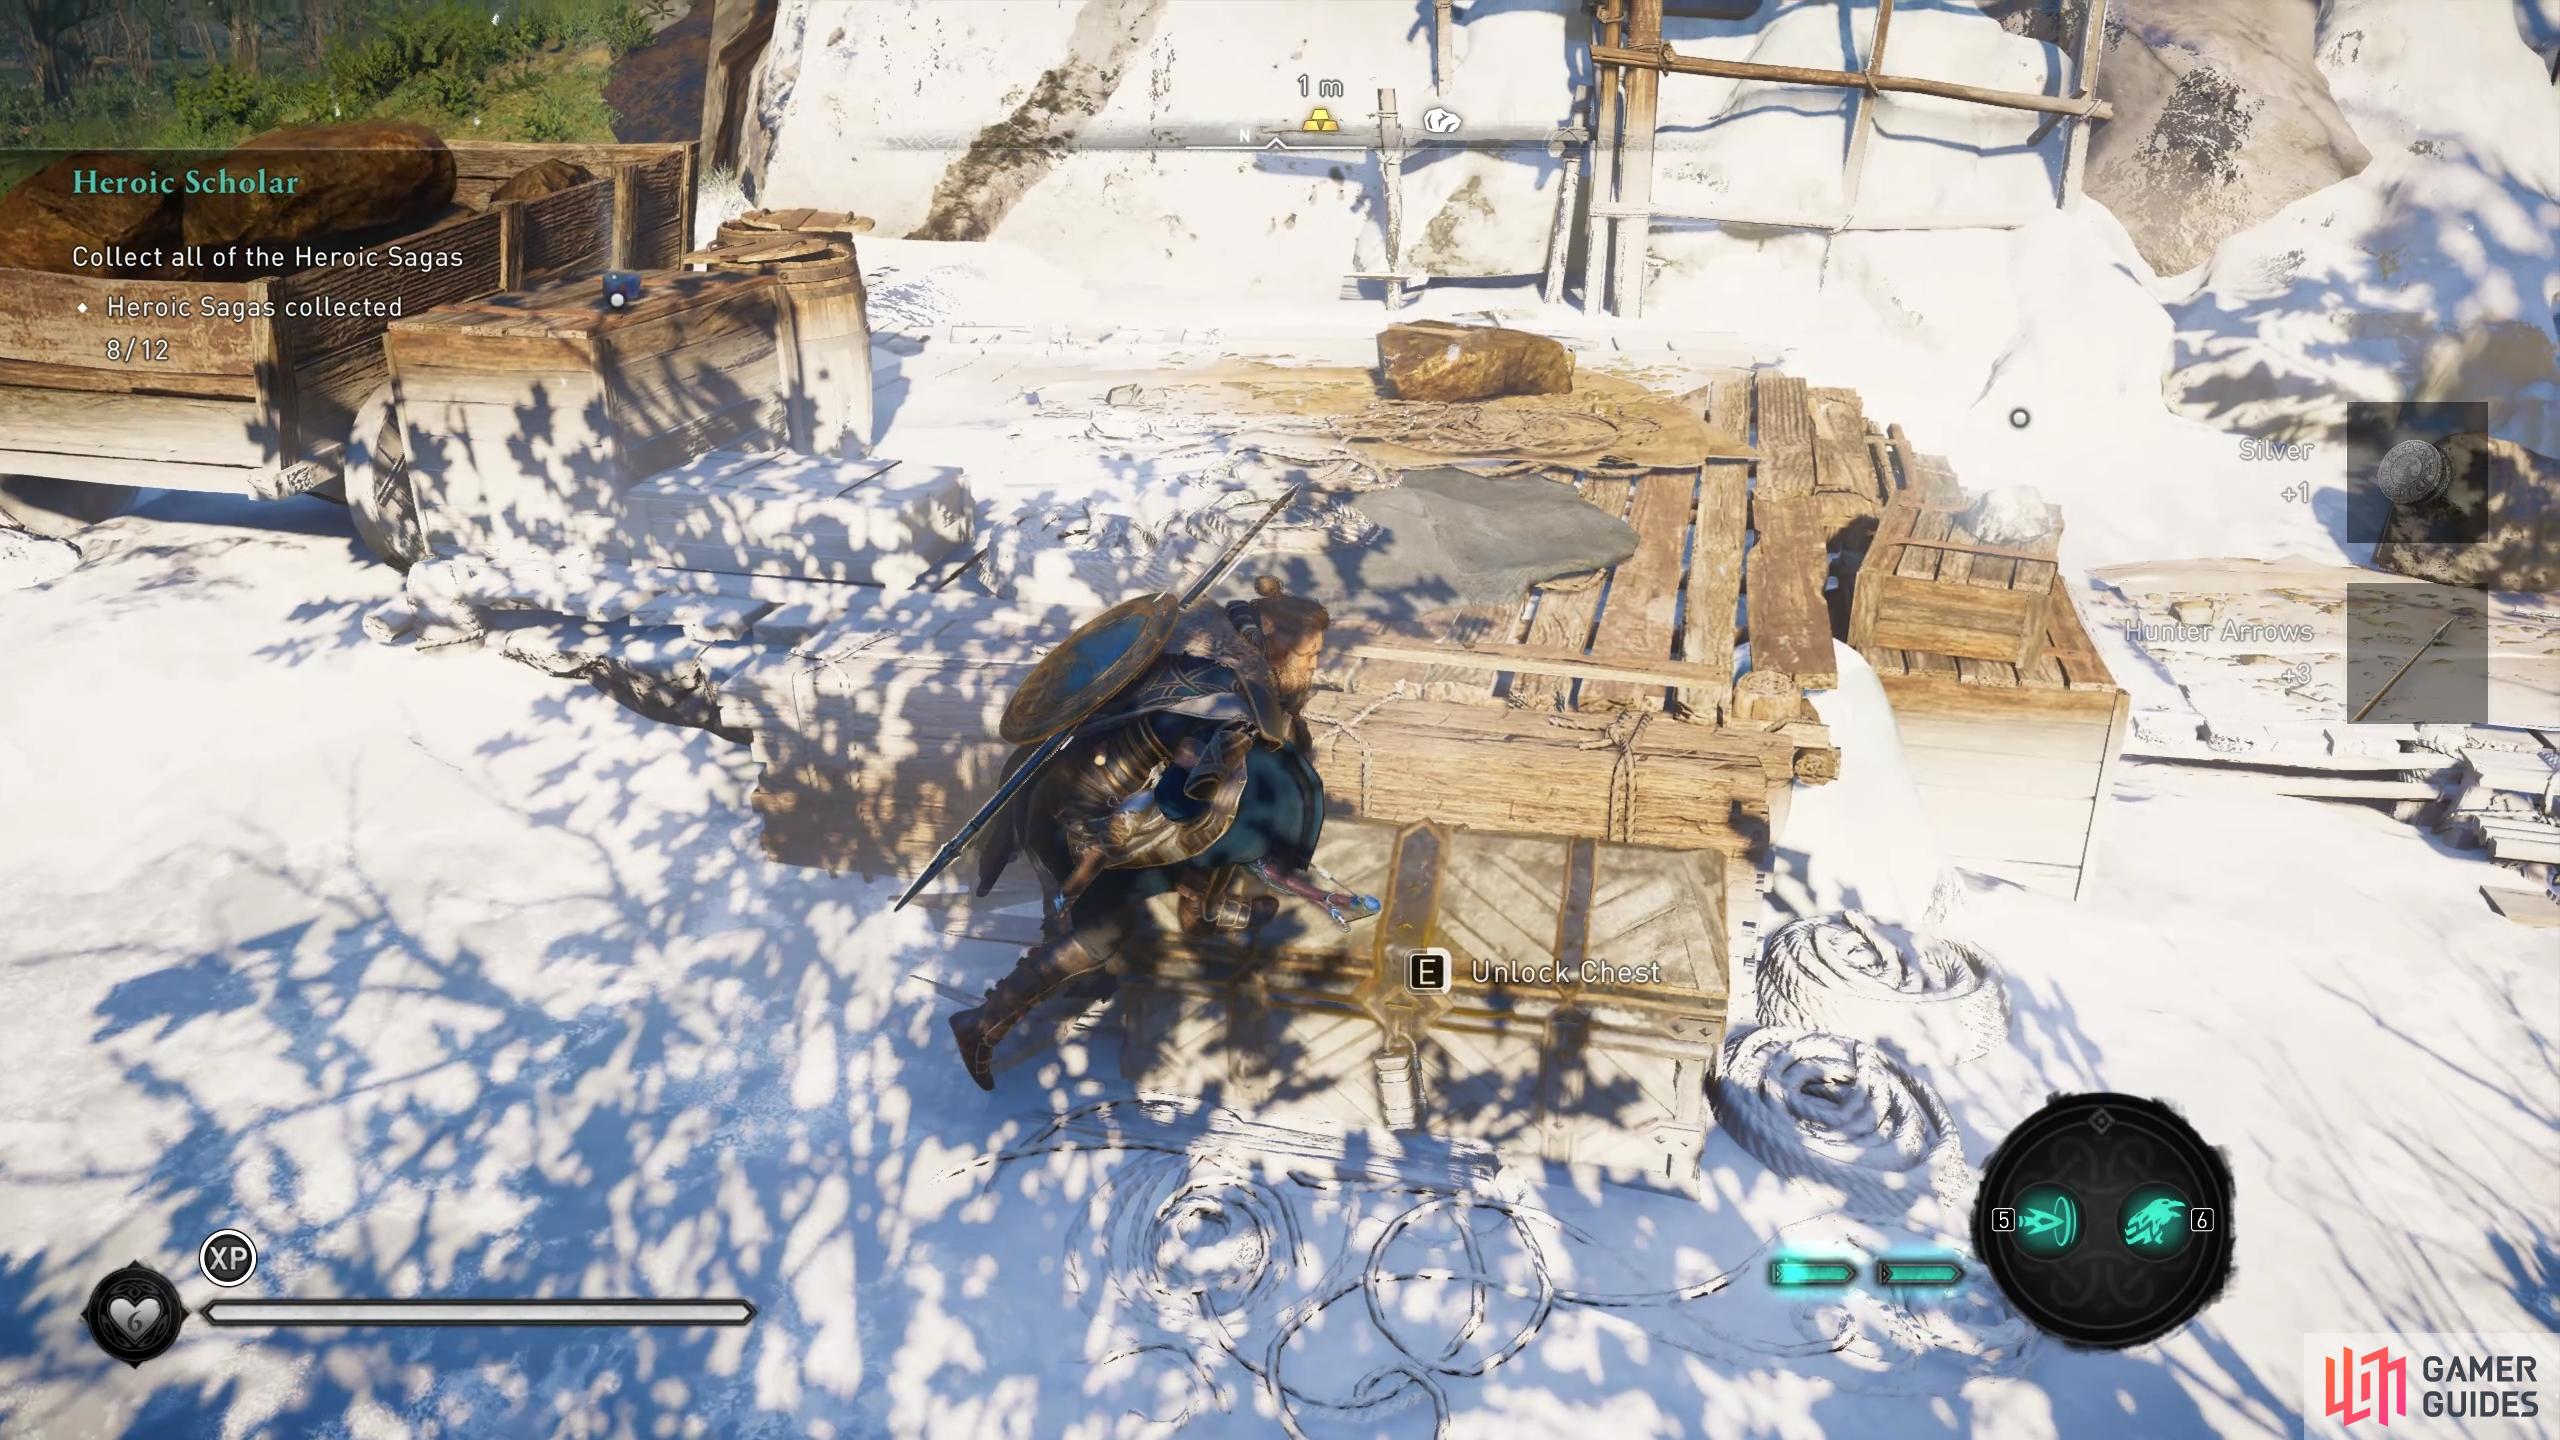 The chest can be opened in the camp once you have the key.